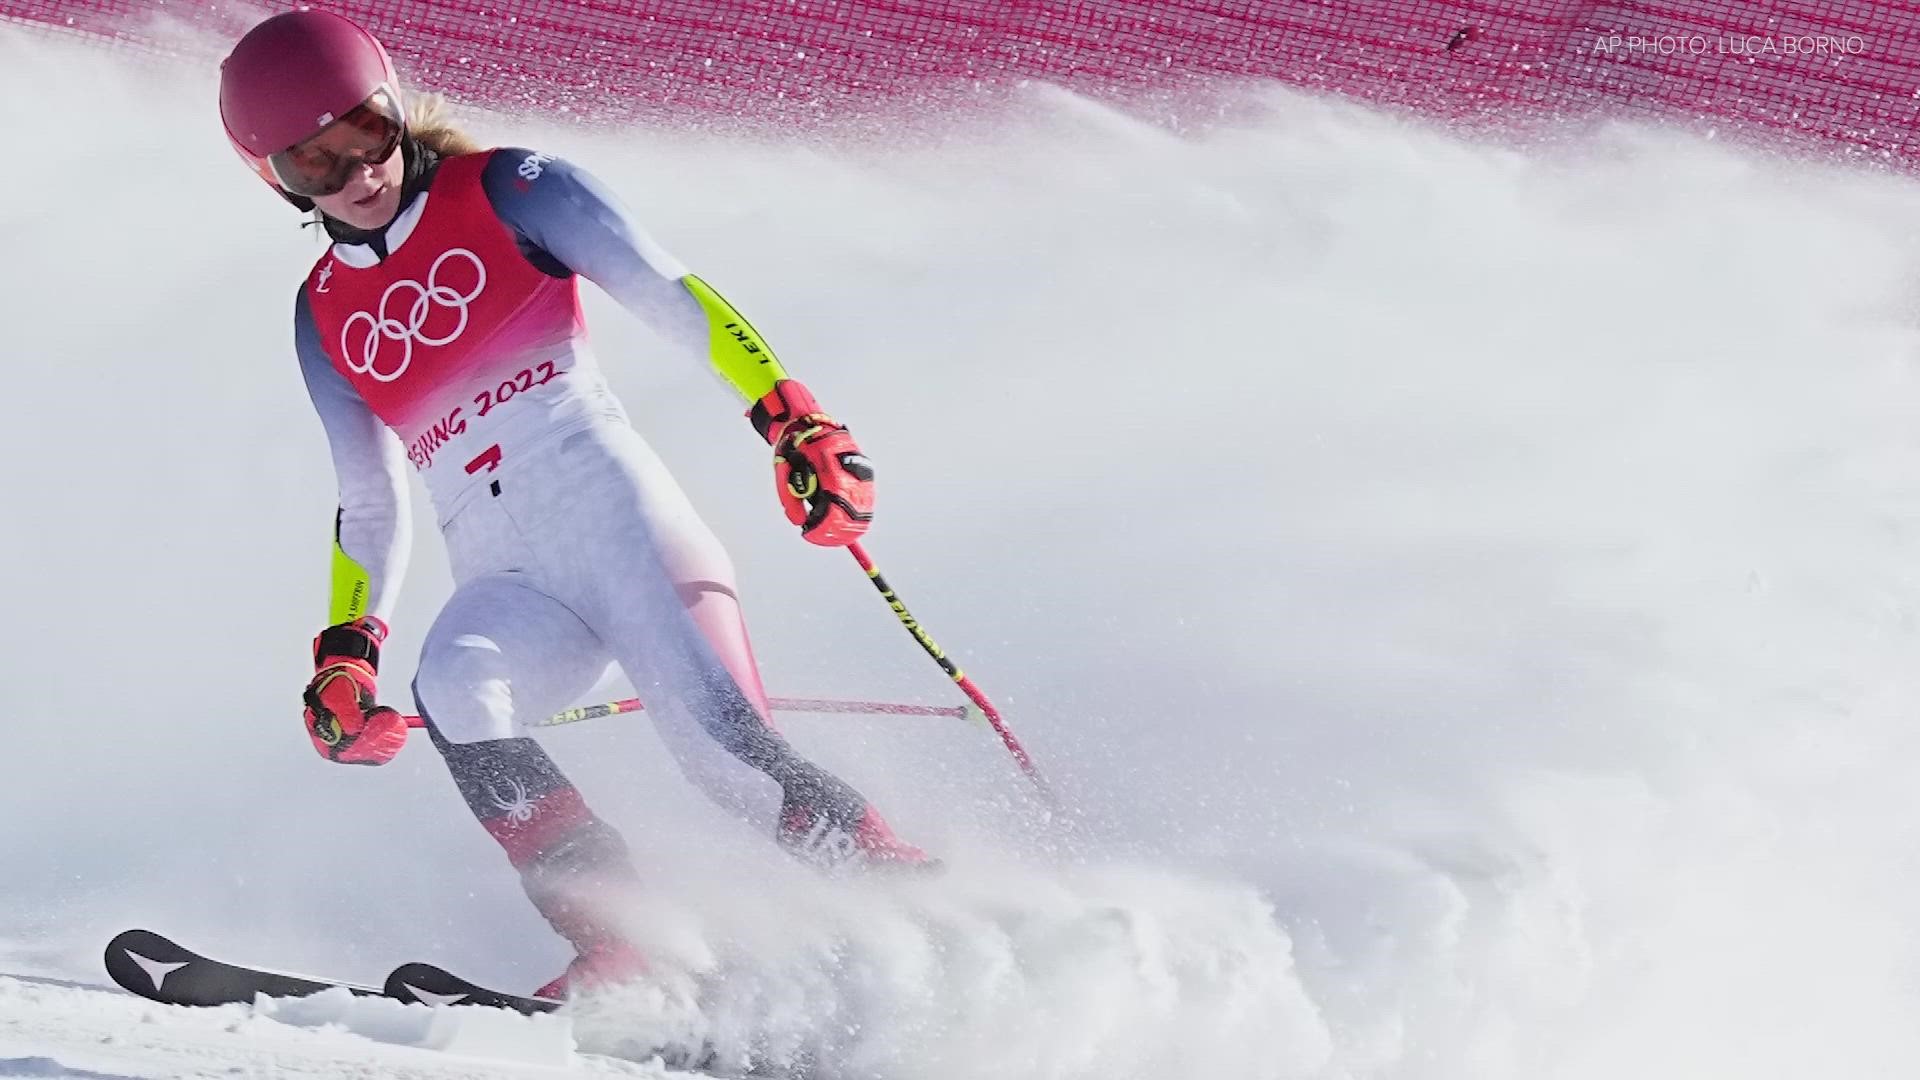 Shiffrin is now out of the event she won at the 2014 Sochi games, but has more events to compete in Beijing.